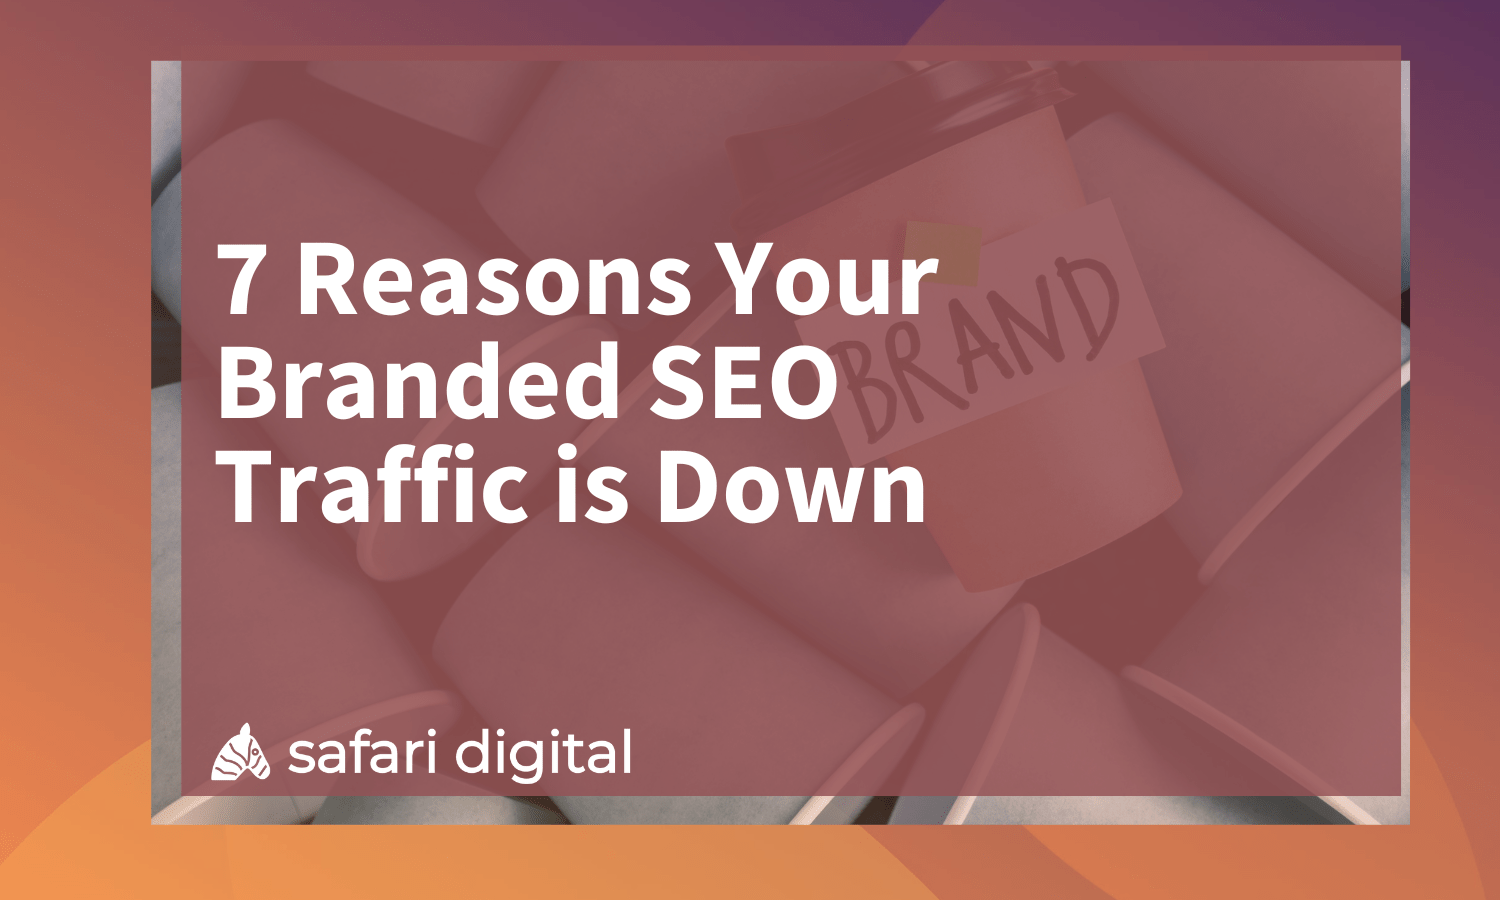 7 Reasons Your Branded SEO Traffic is Down